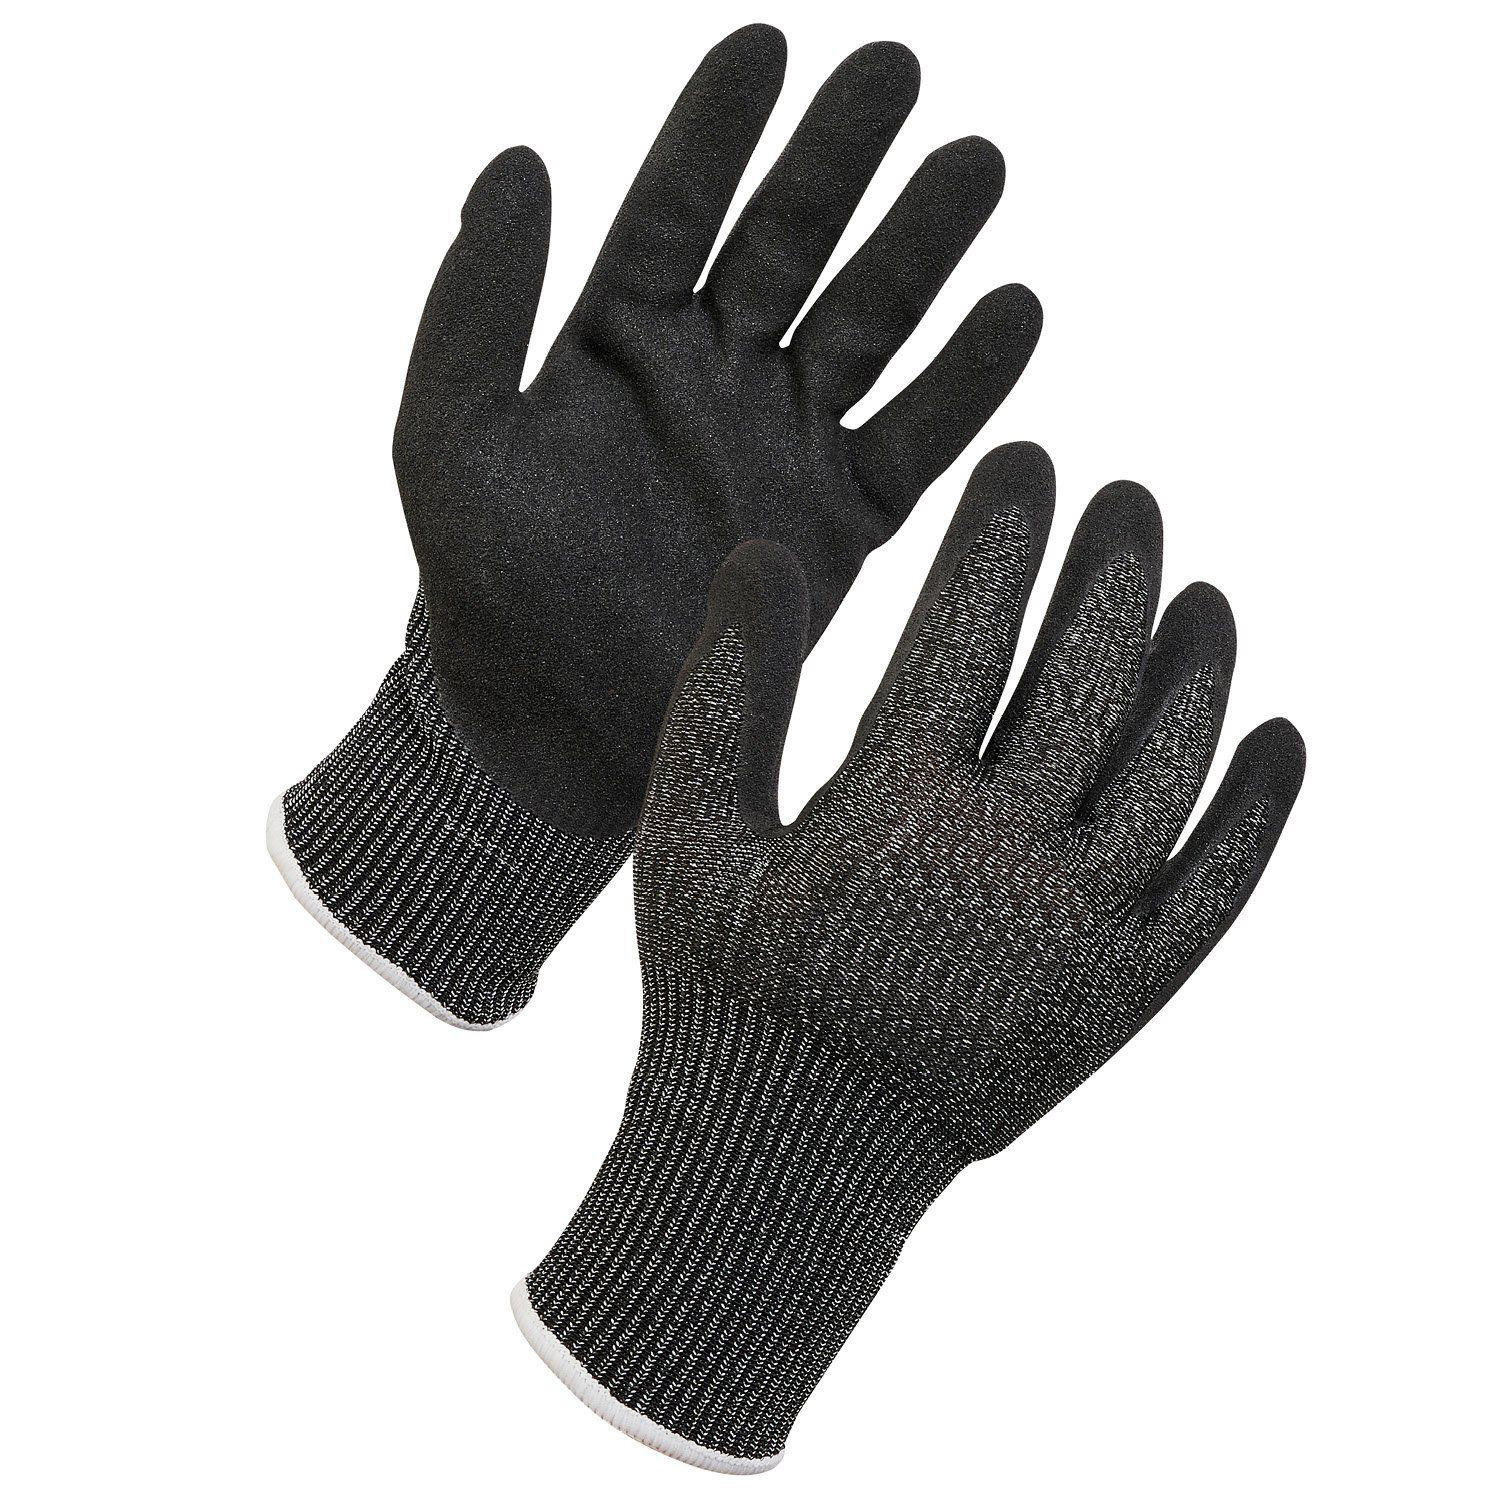 Level F Cut Resistant Gloves with Against Abrasions, Punctures and Tears